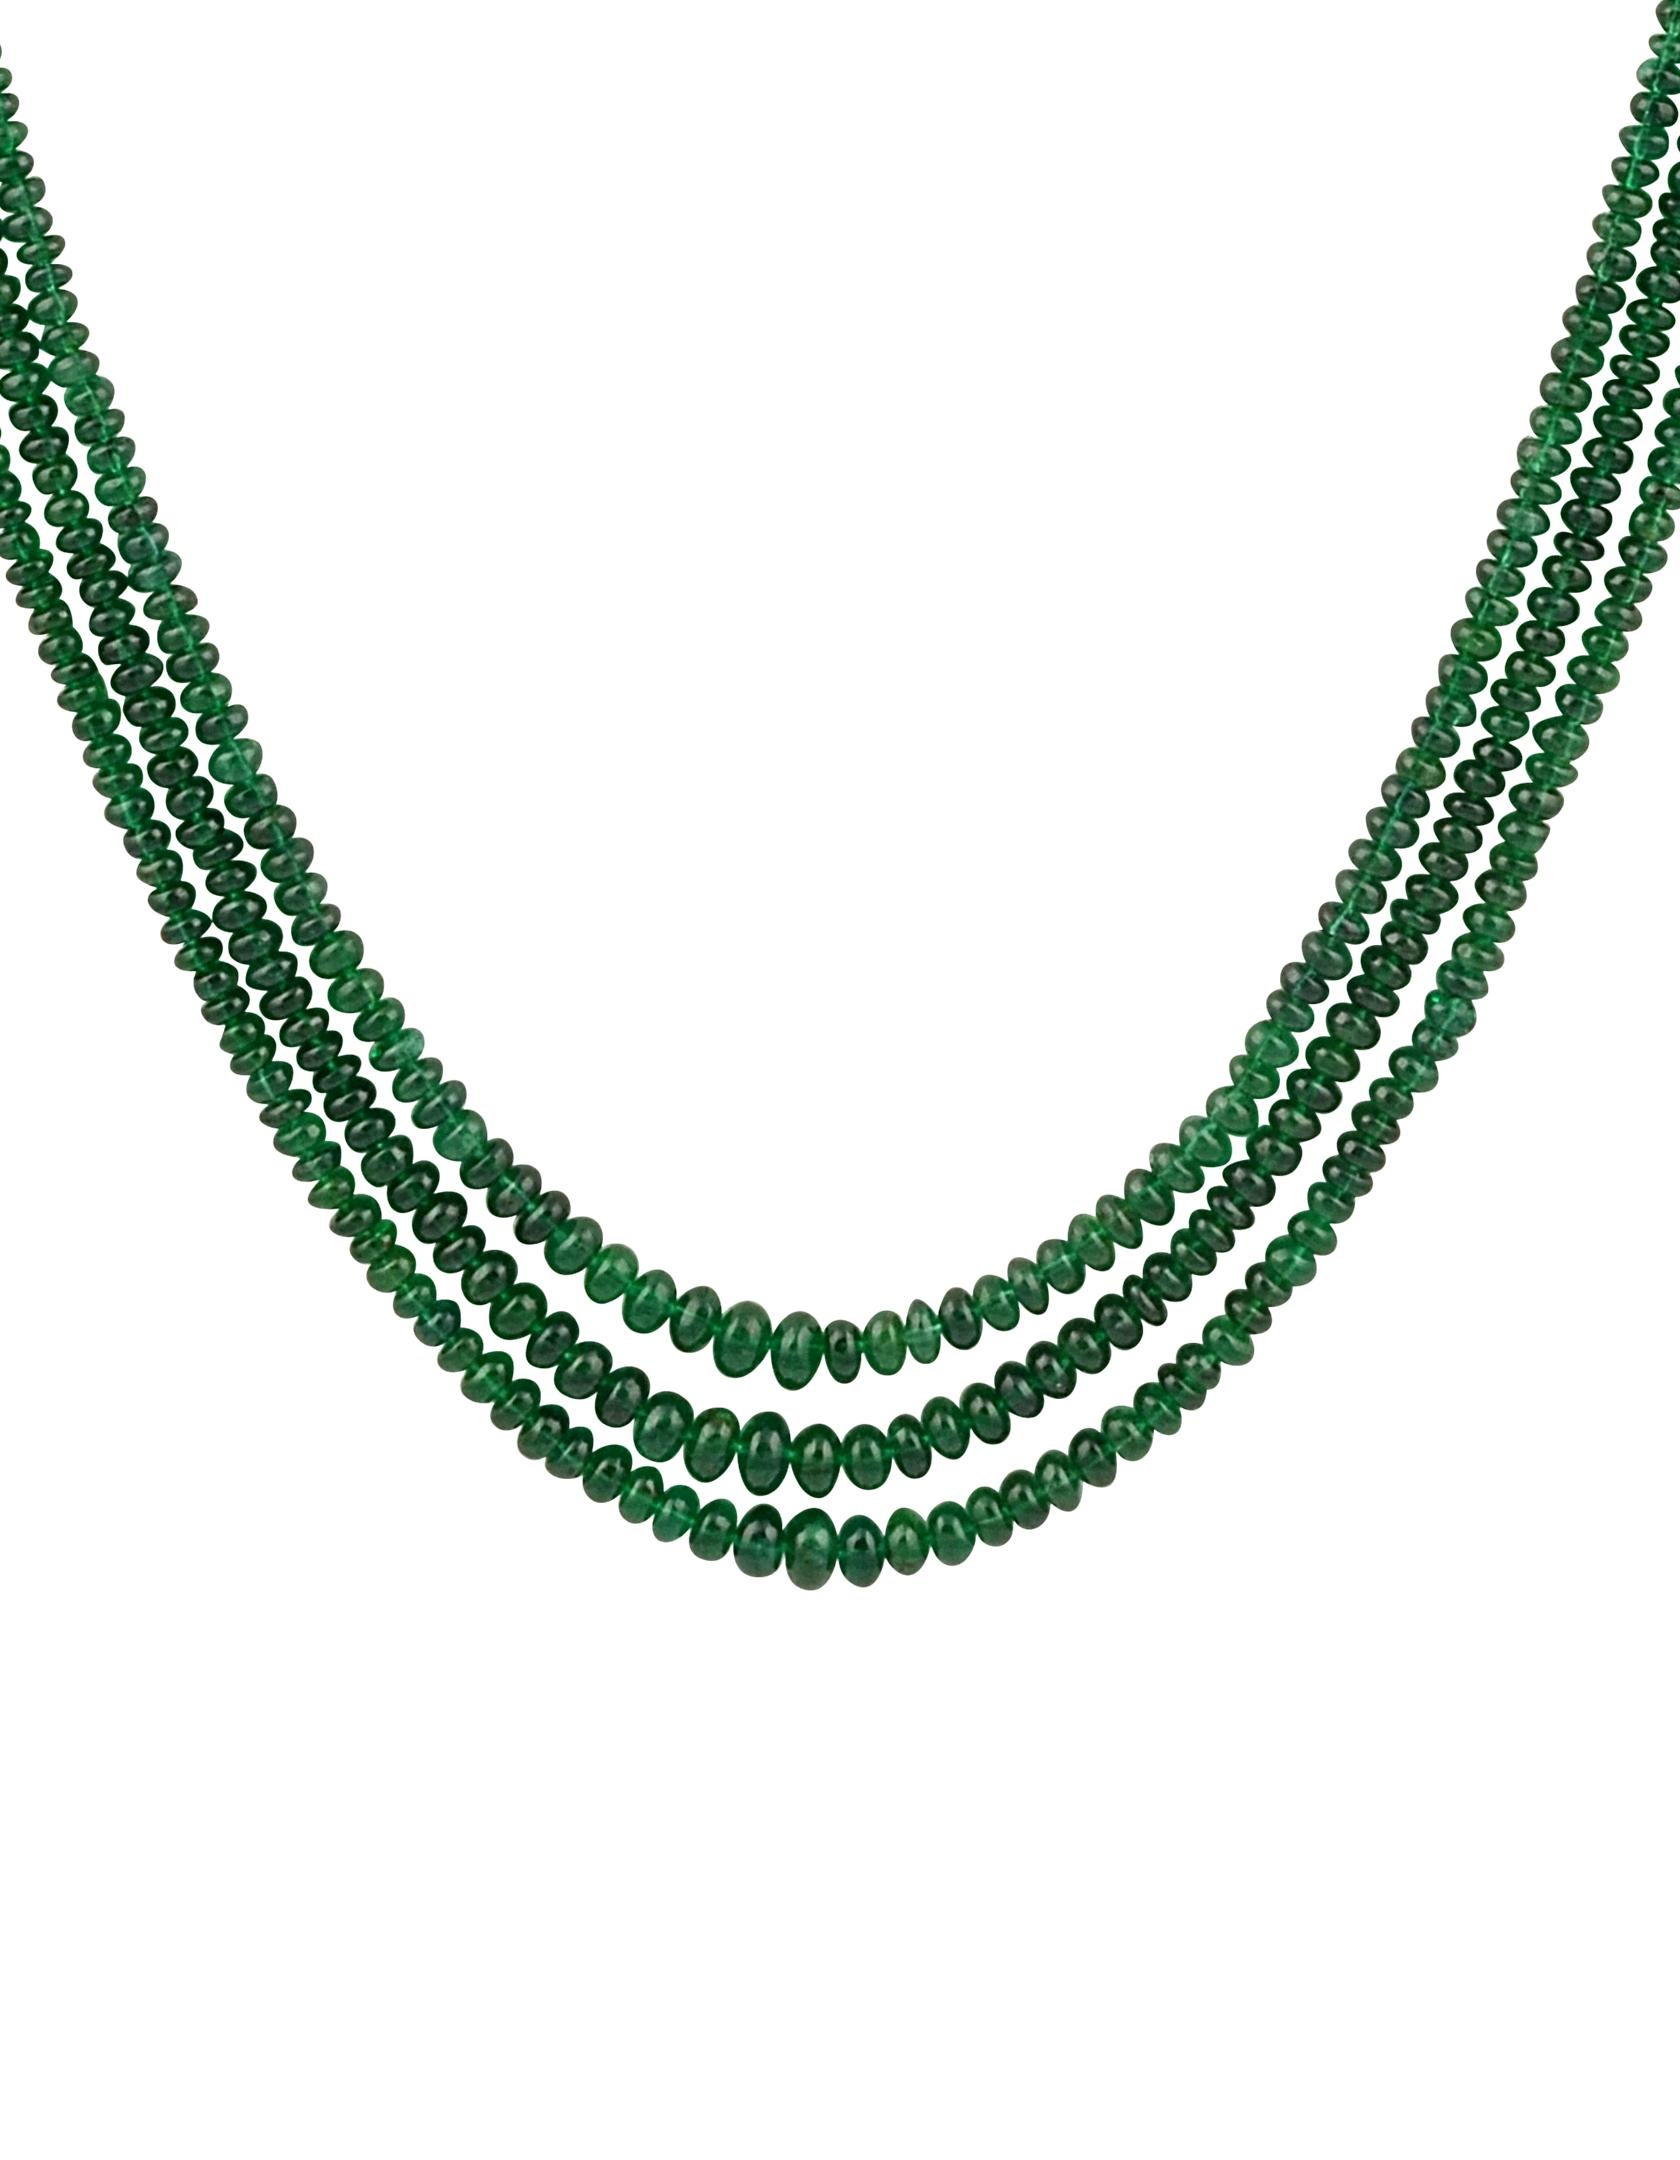 Approximately 200 Carat  very fine Emerald Beads 3 Line Necklace With 14 Karat Yellow Gold Clasp Adjustable with multiple links
This spectacular Necklace   consisting of approximately 200 Ct  of fine beads.
The shine sparkle and brilliance with deep